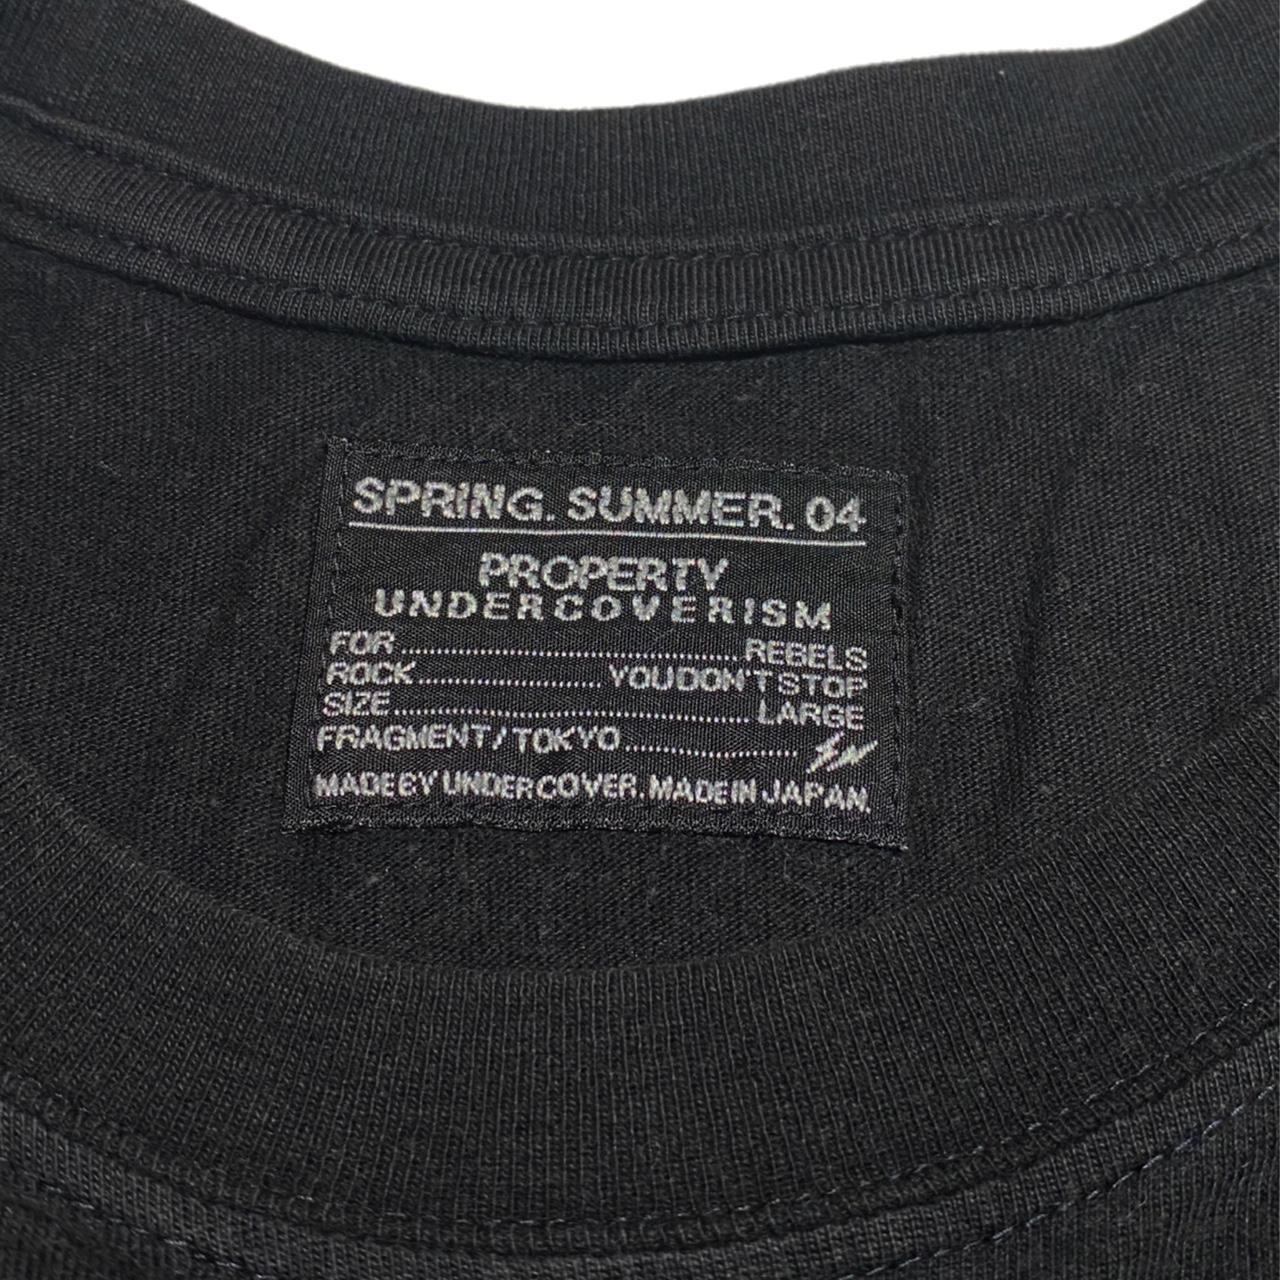 Product Image 3 - Undercover SS04 All Junk Out!!